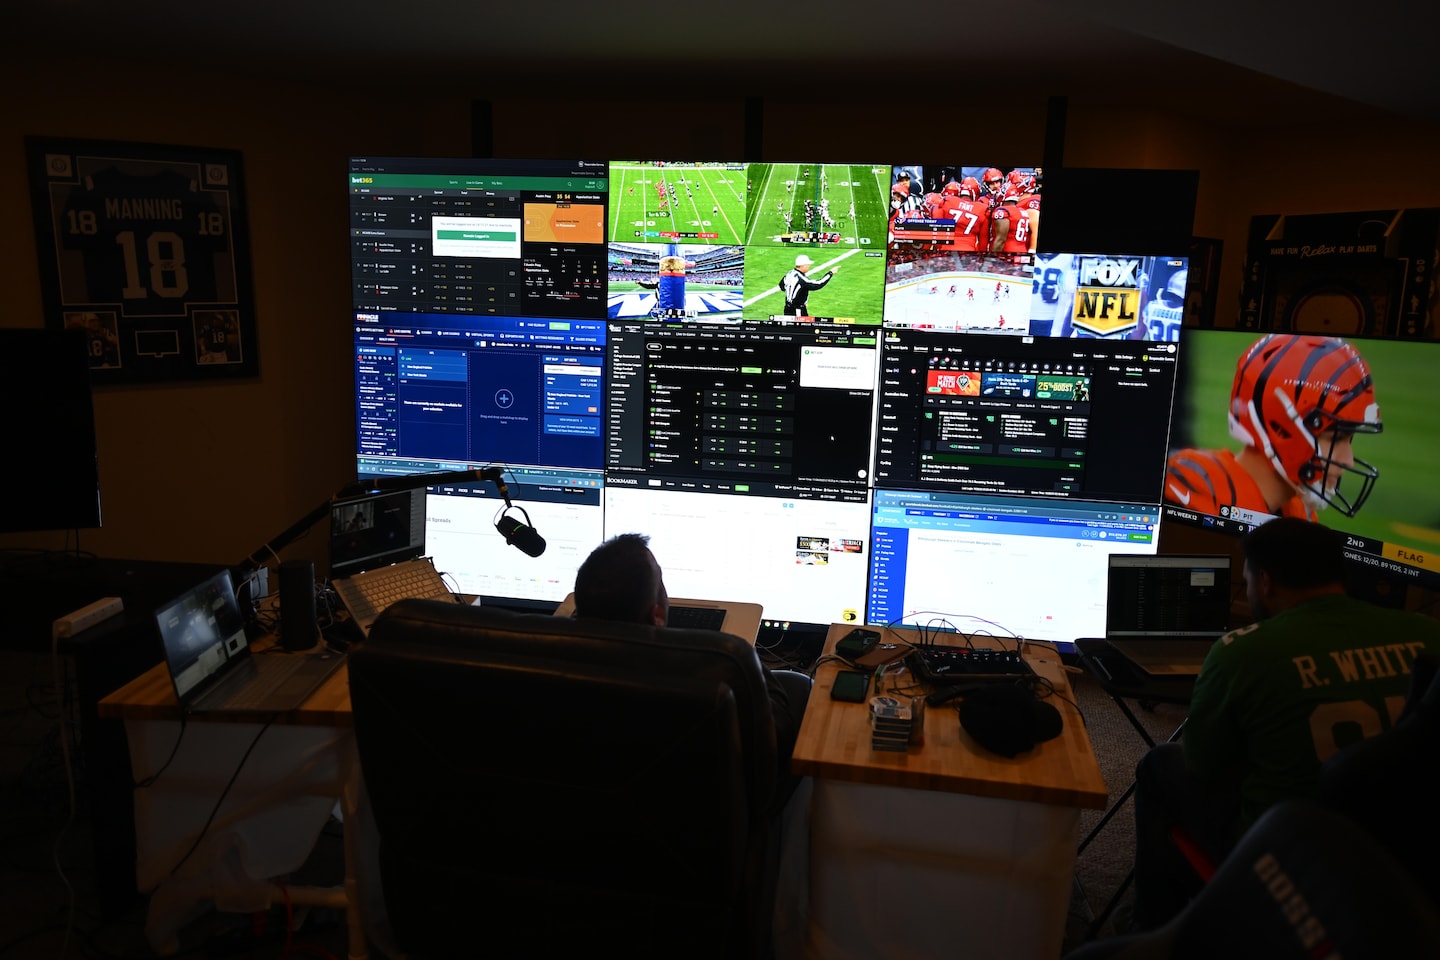 The over-the-top home offices of full-time sports bettors